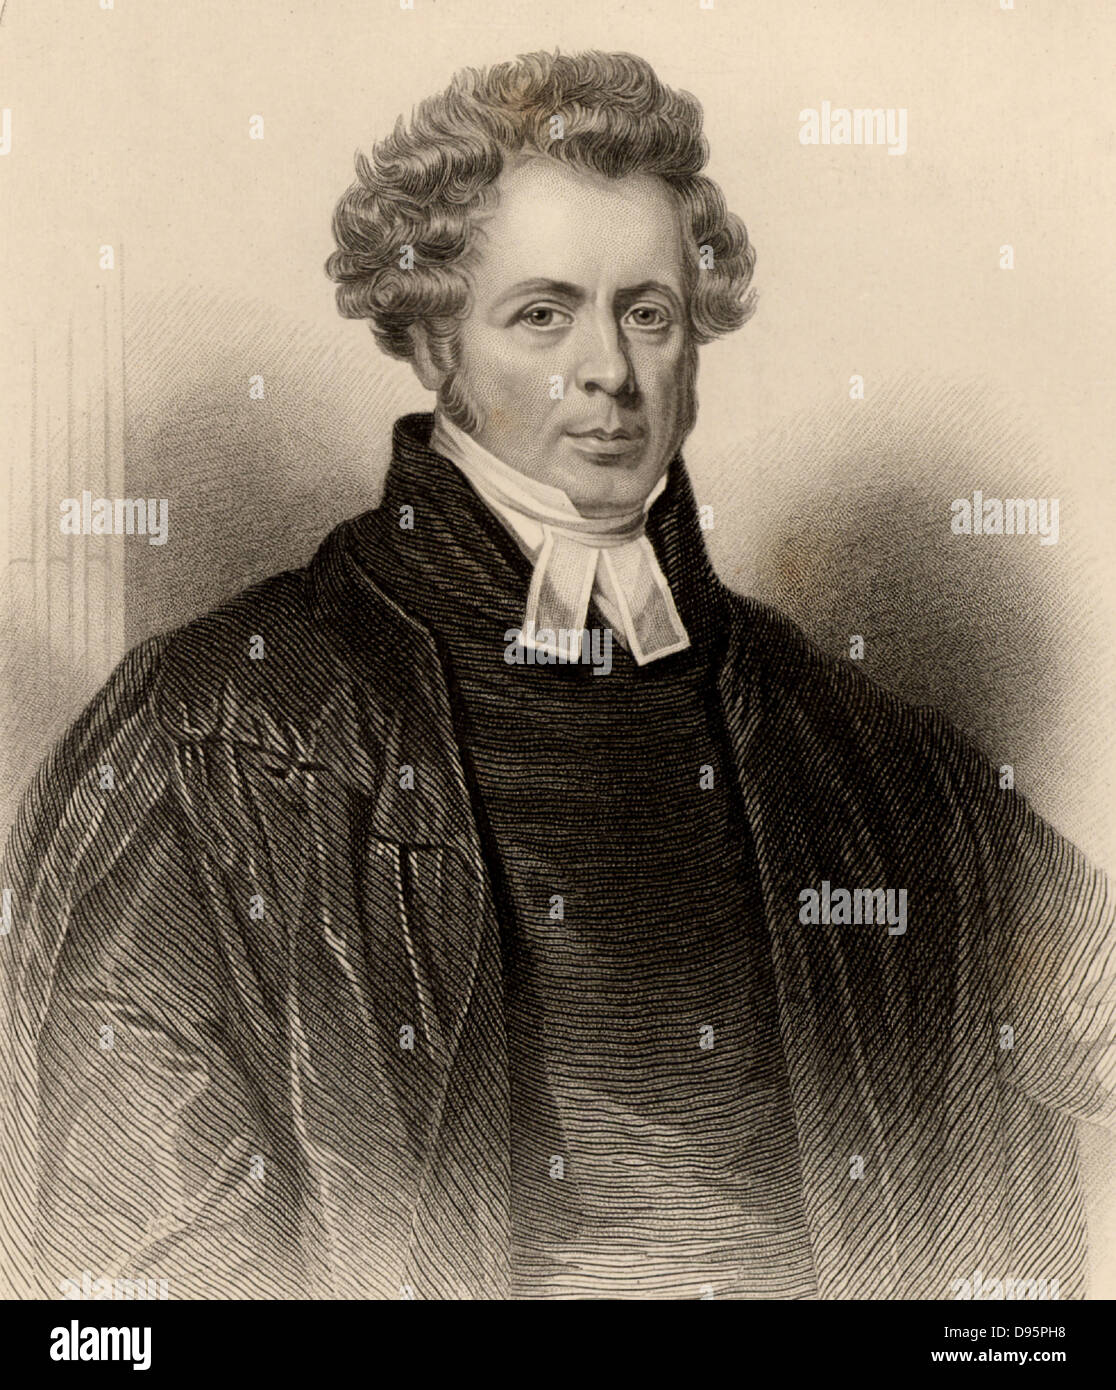 Andrew Thomson (1779-1831) Scottish Presbyterian divine and popular Edinburgh minister and preacher.  Engraving from 'A Biographical Dictionary of Eminent Scotsmen' by the Rev. Thomas Thomson (Glasgow, Edinburgh and London, 1870). Stock Photo